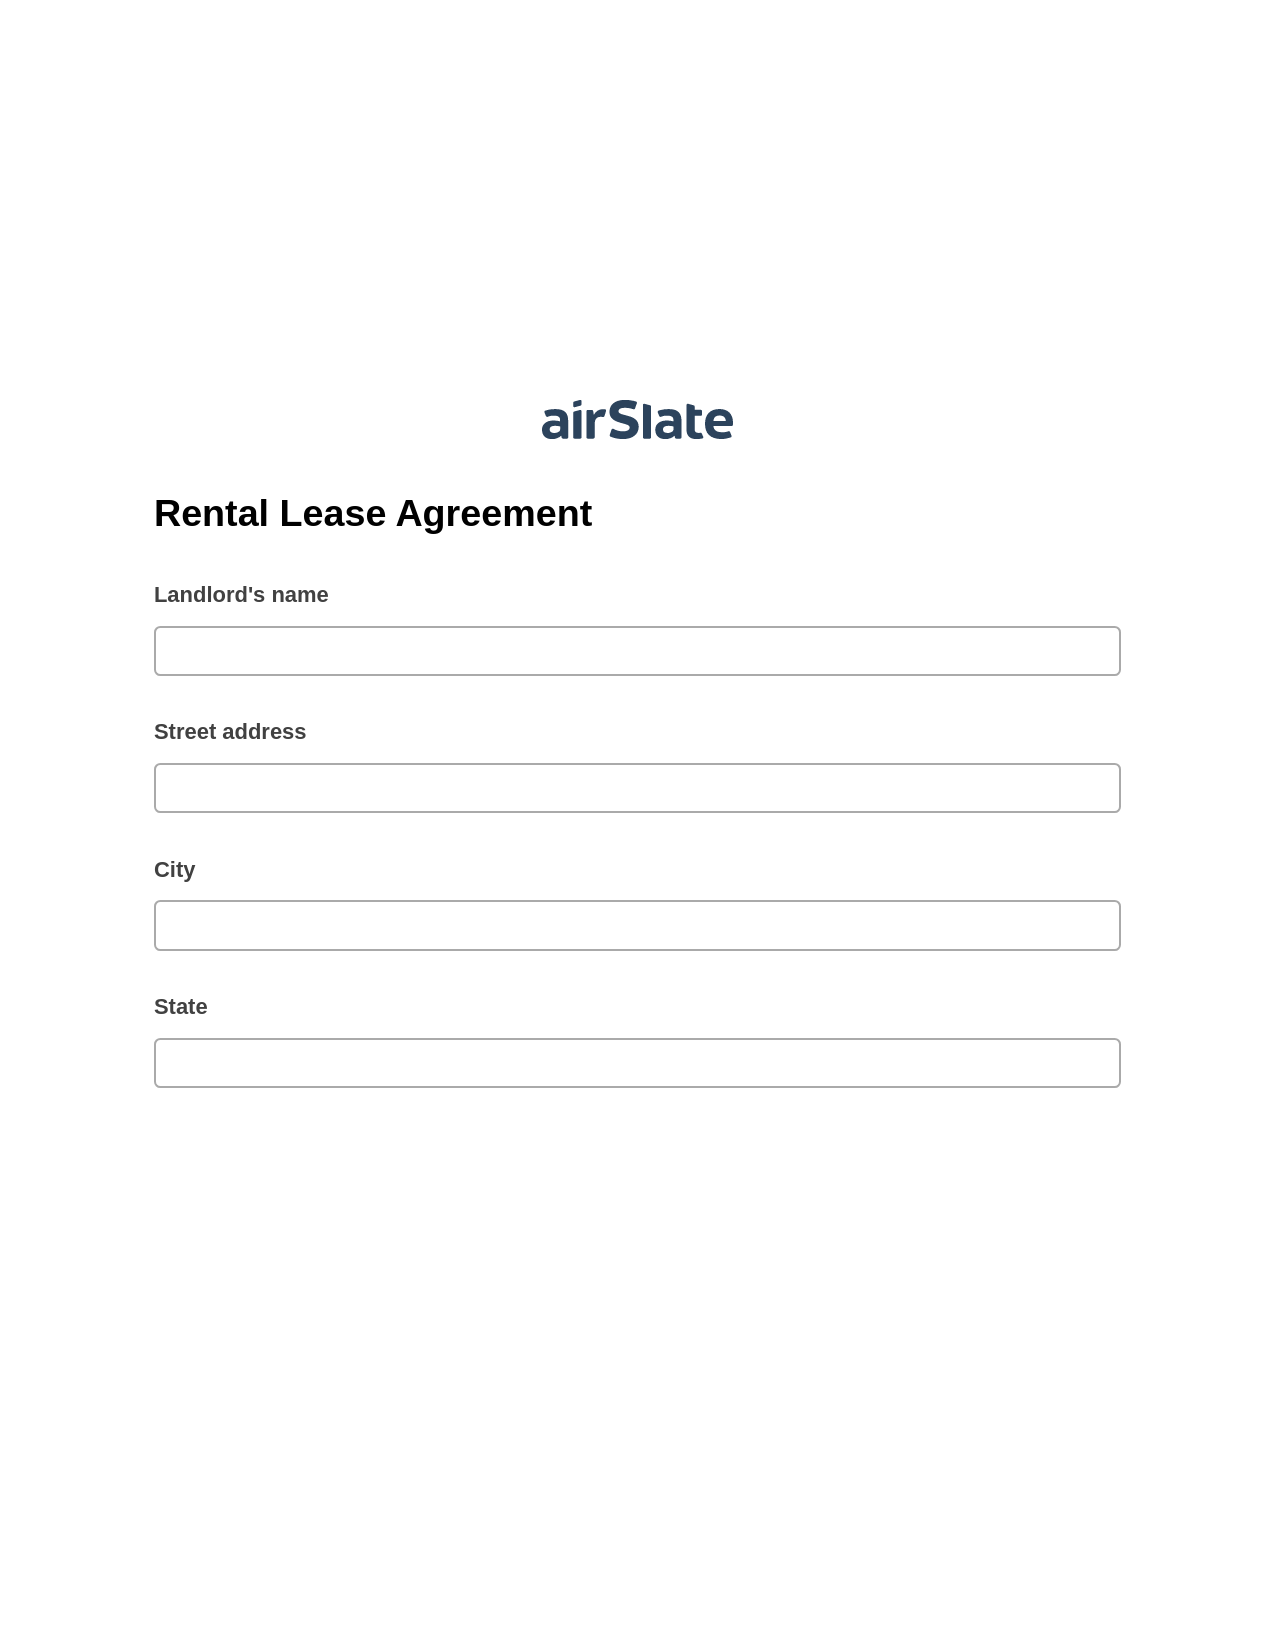 Rental Lease Agreement Pre-fill Document Bot, Remove Tags From Slate Bot, Export to Formstack Documents Bot